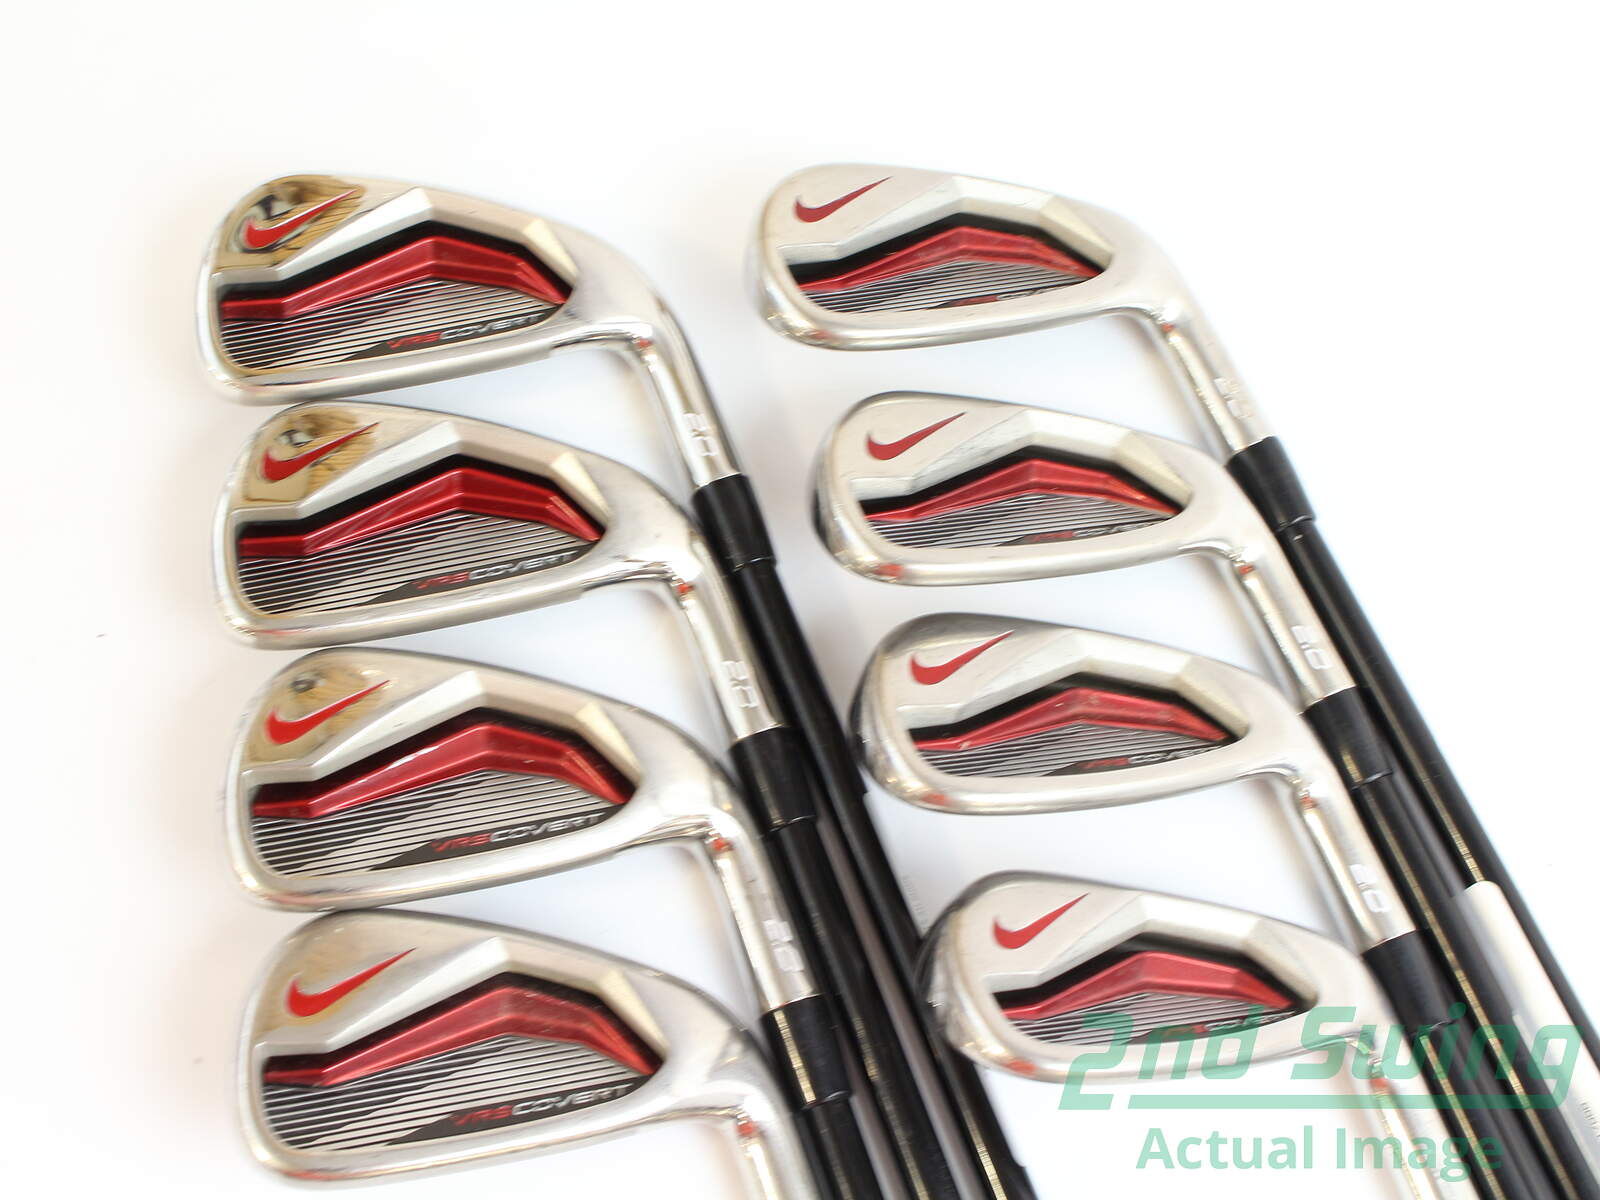 nike covert 2.0 irons for sale